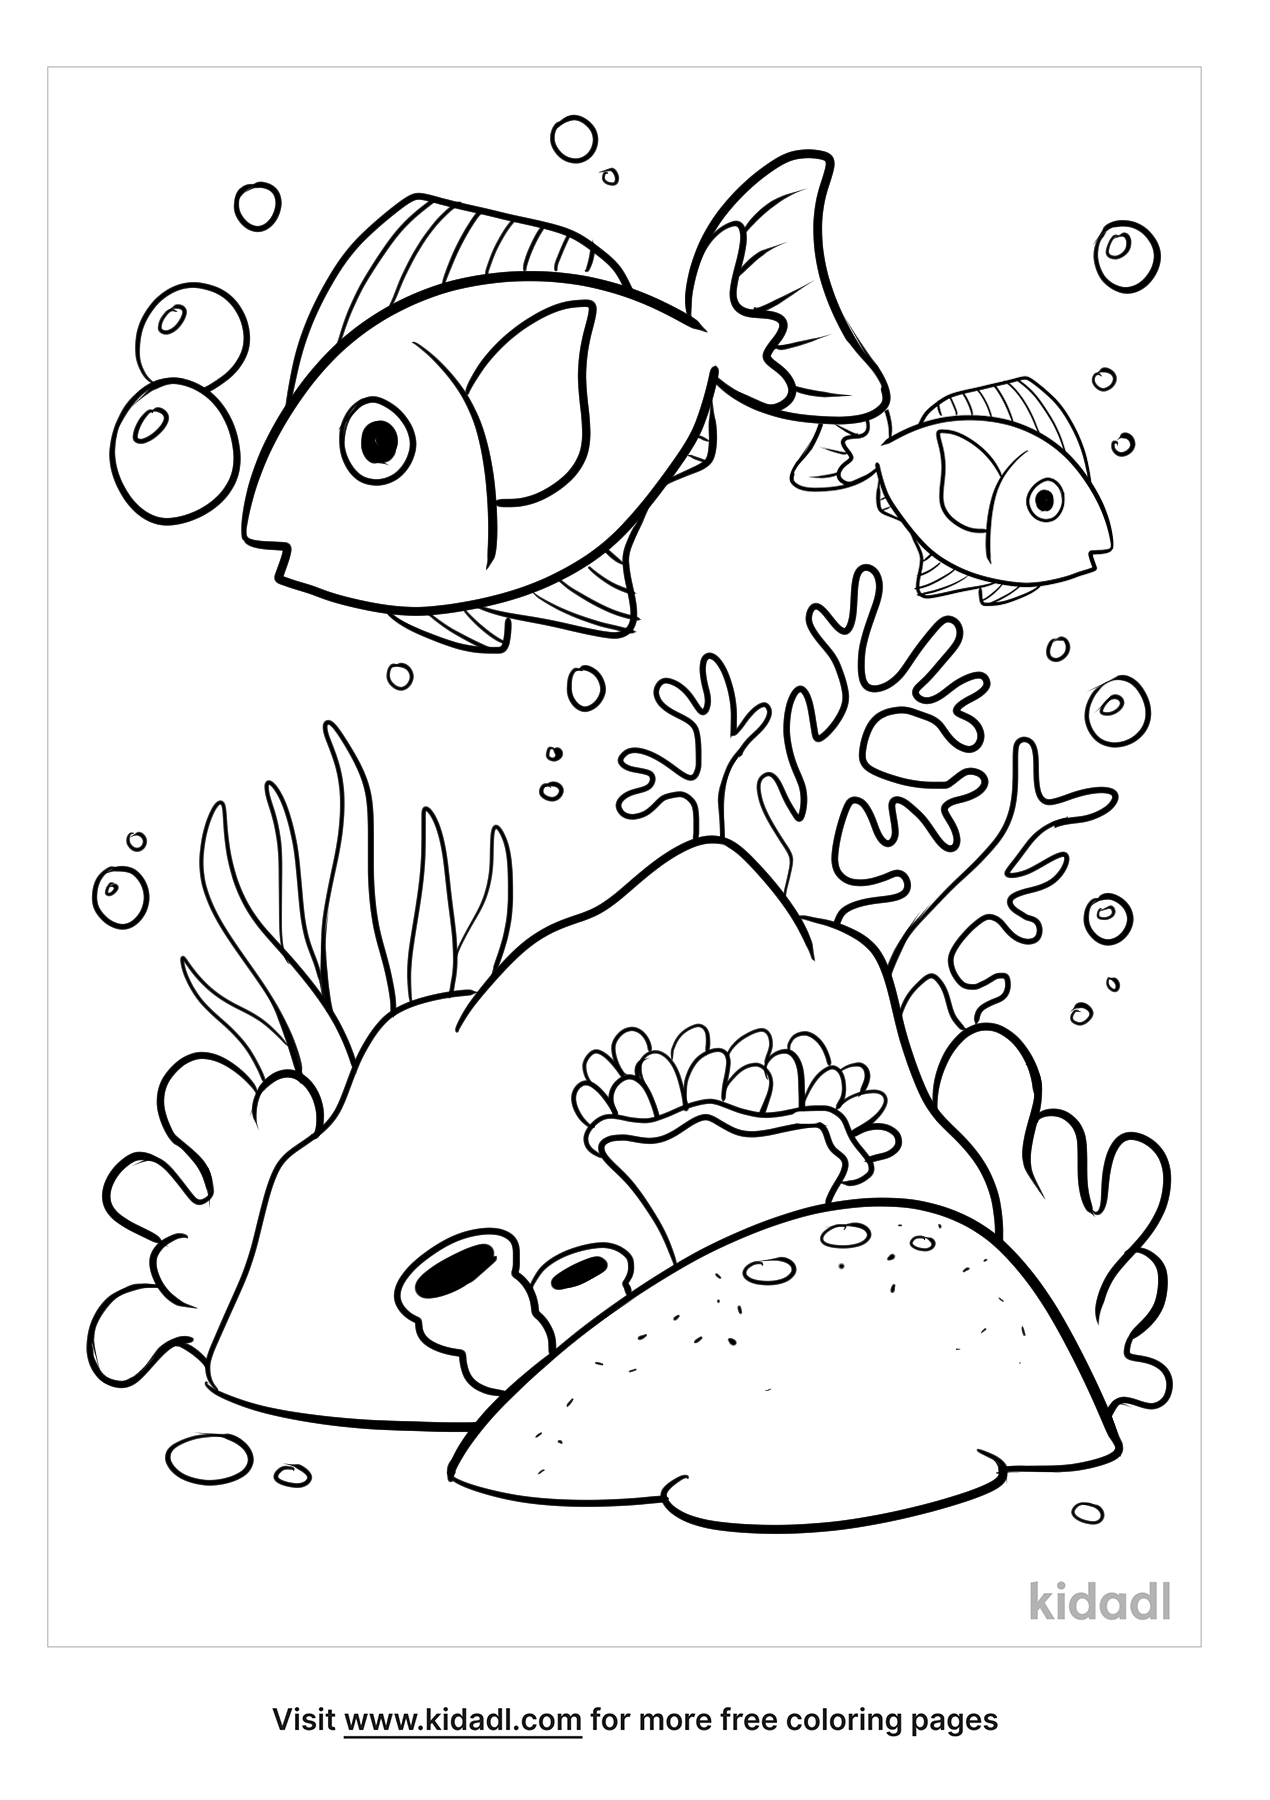 Coral Reef Coloring Pages | Free Ocean Coloring Pages | Kidadl